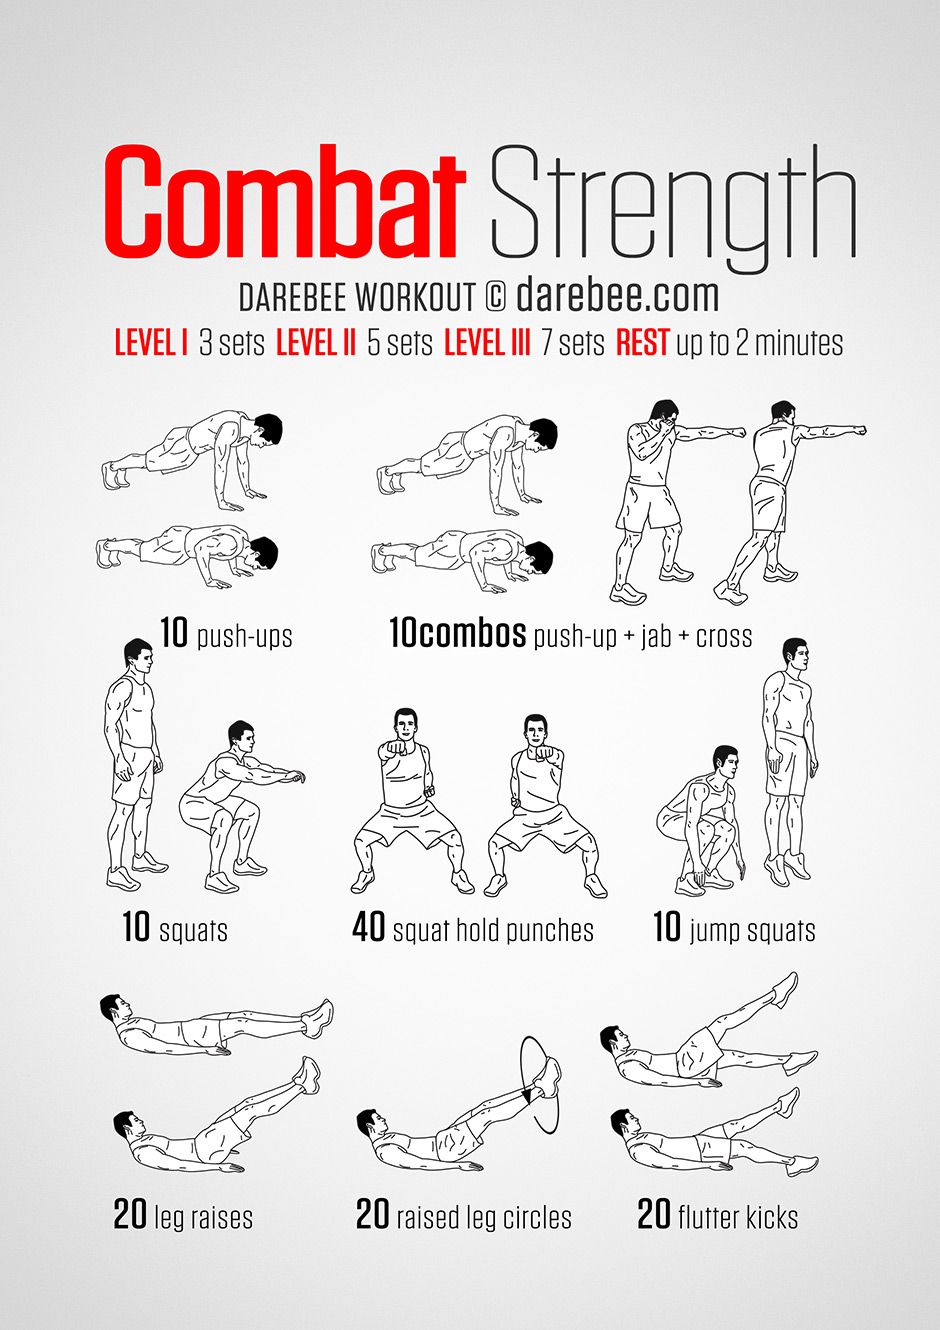 Combat Strength Workout | Strength workout, Boxing training workout